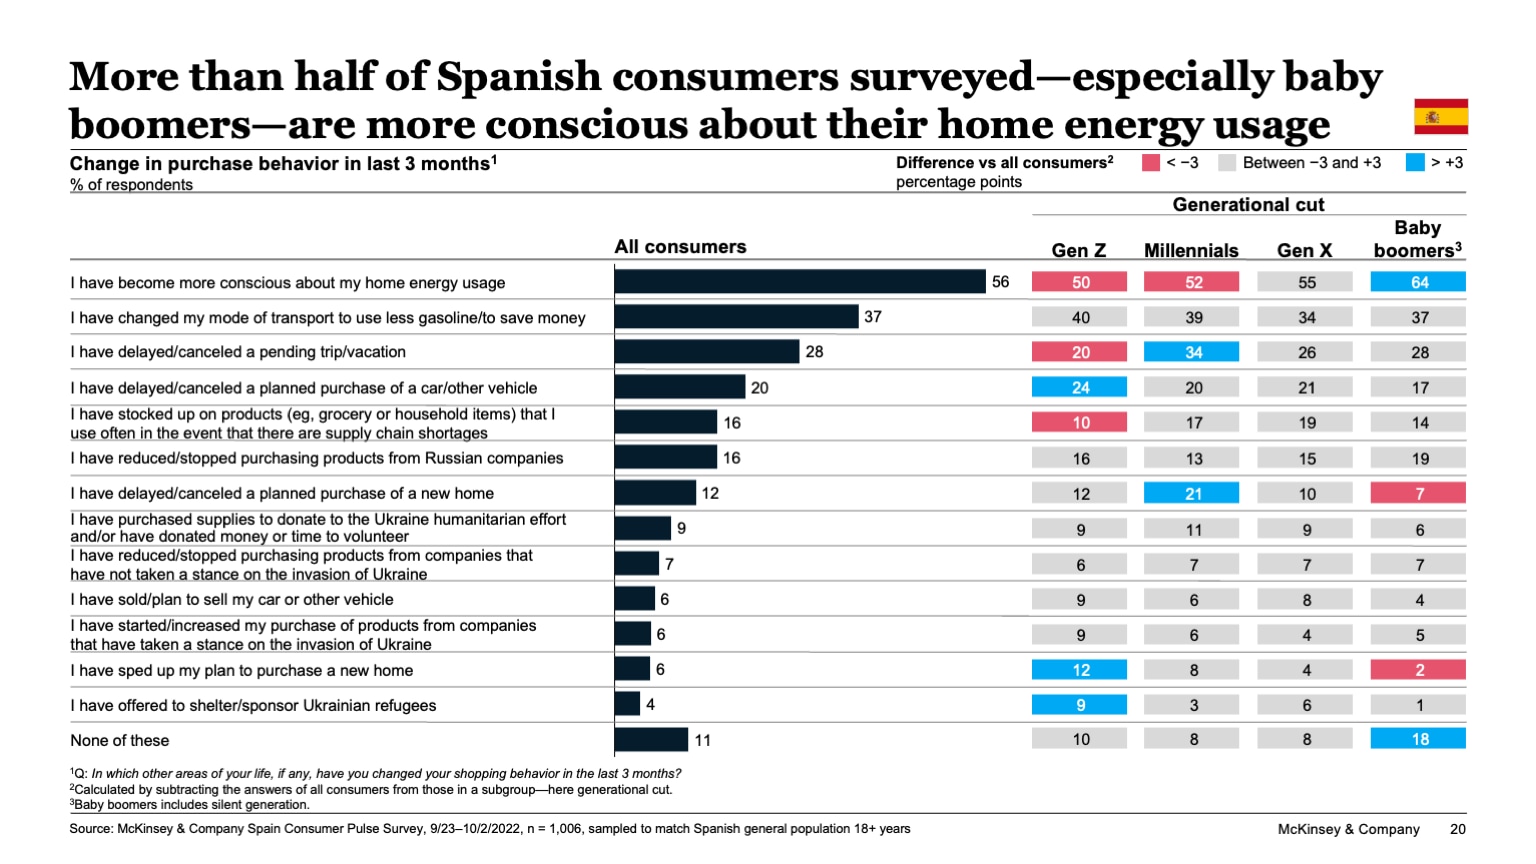 More than half of Spanish consumers surveyed—especially baby boomers—are more conscious about their home energy usage